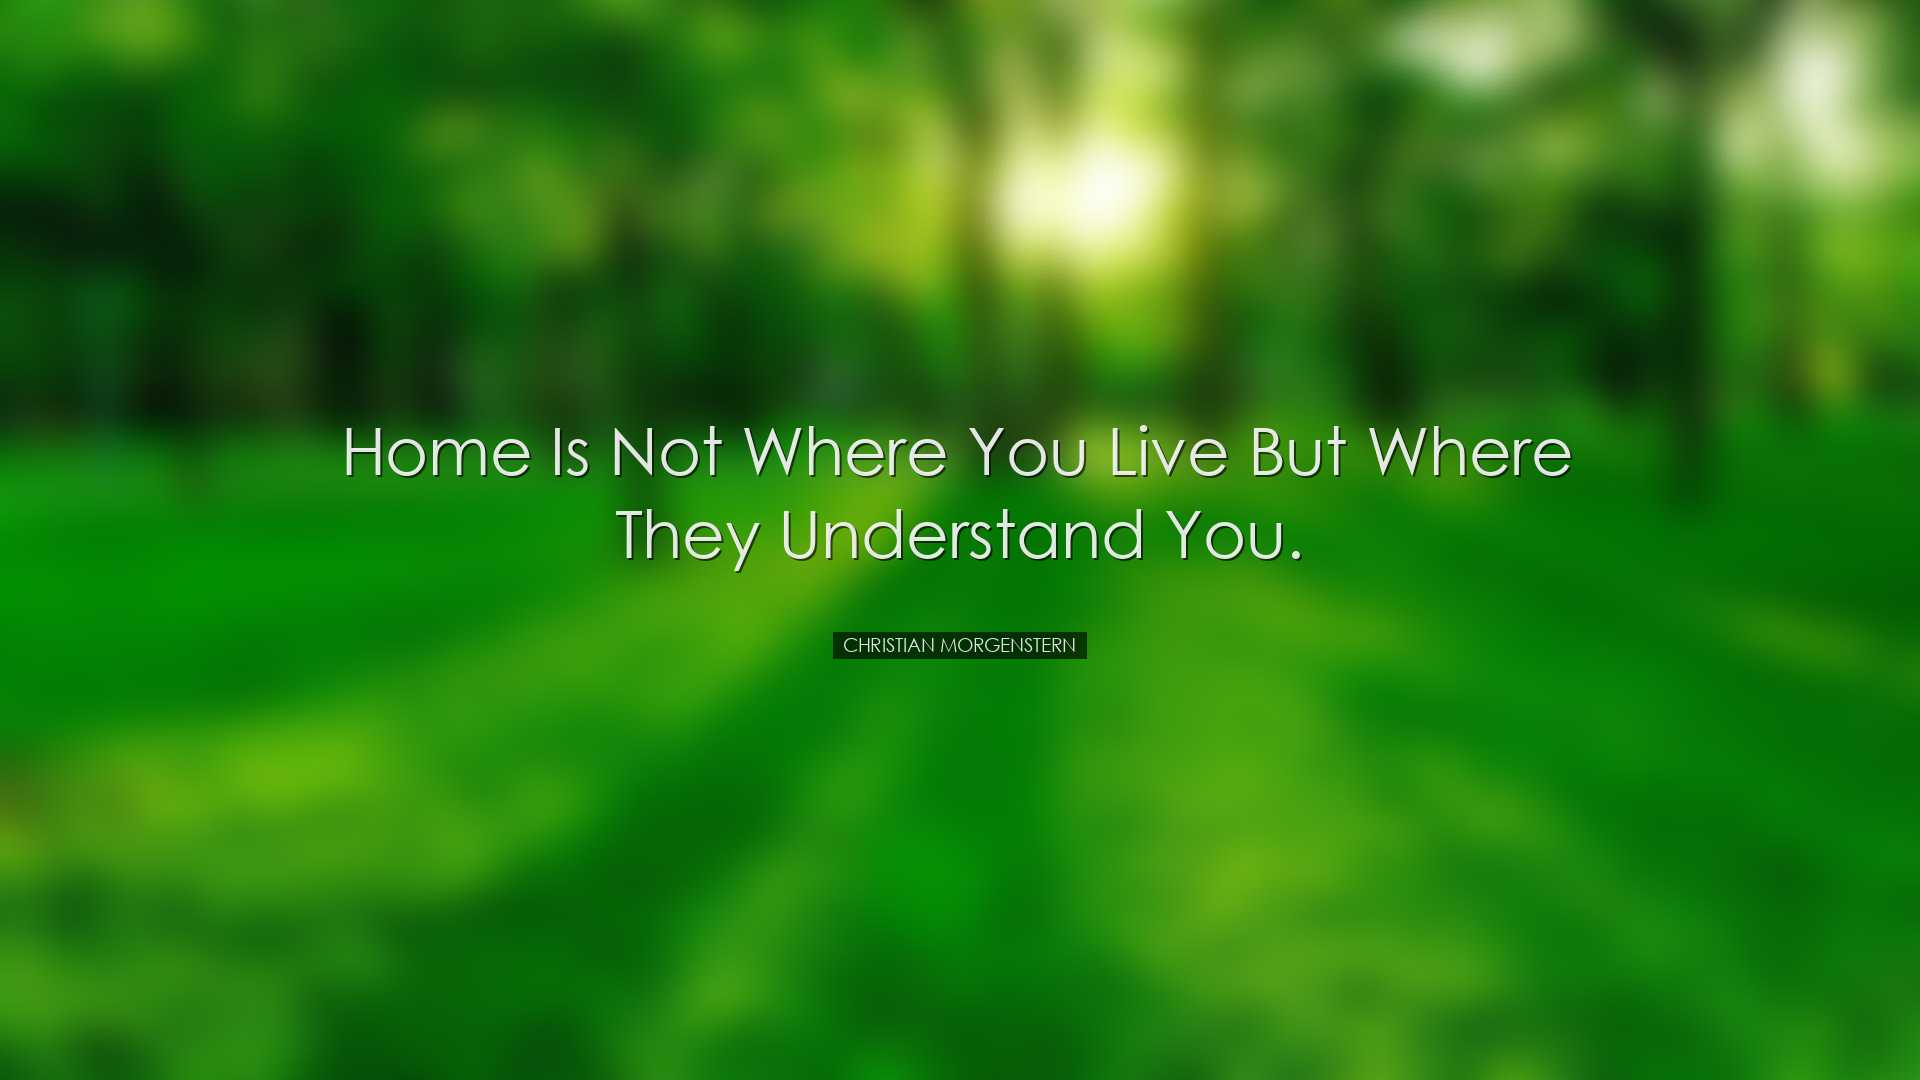 Home is not where you live but where they understand you. - Christ